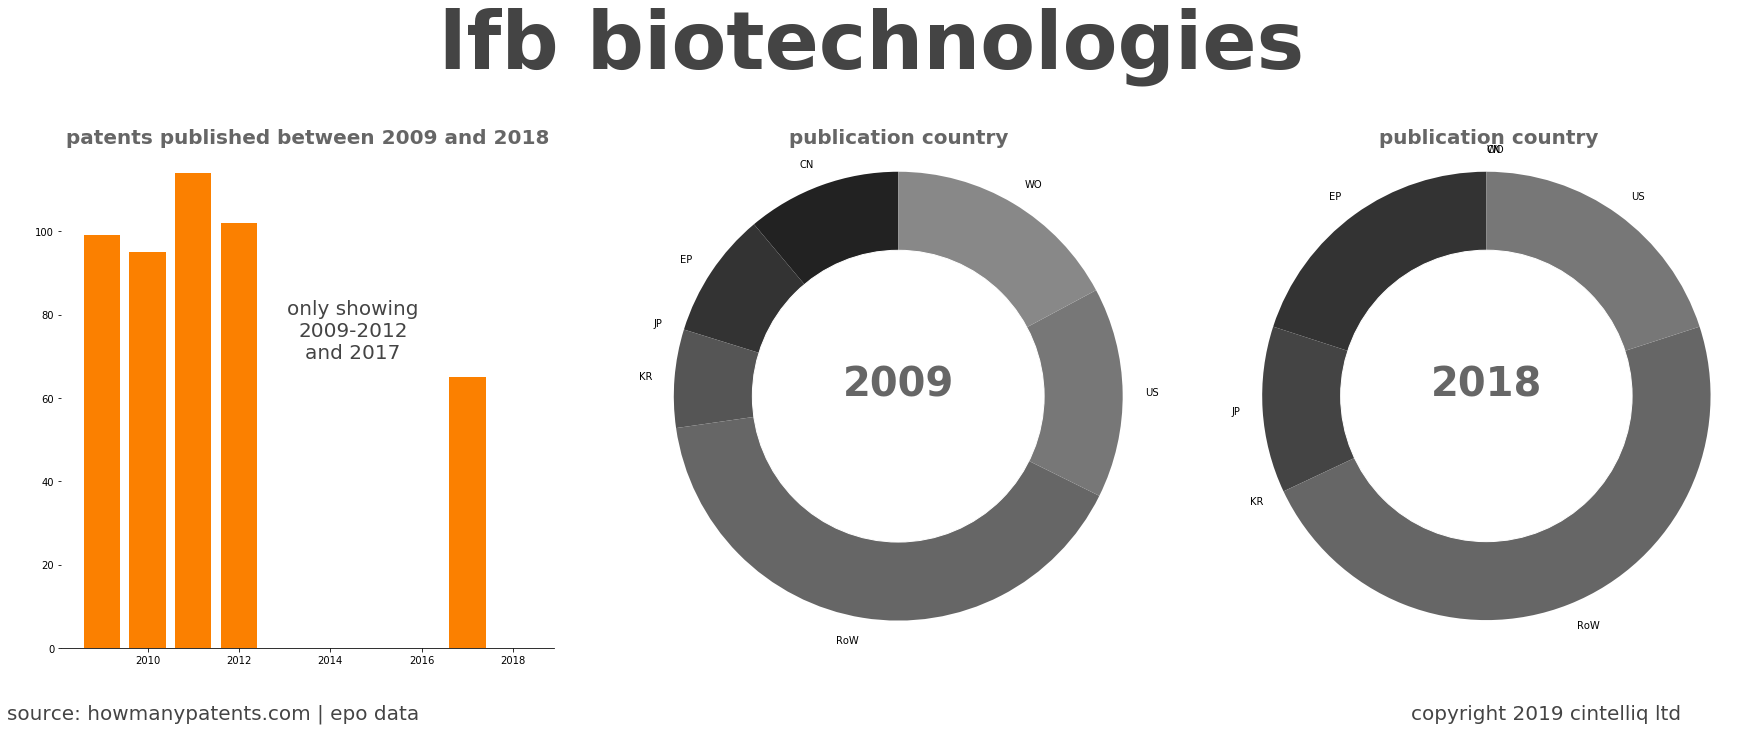 summary of patents for Lfb Biotechnologies